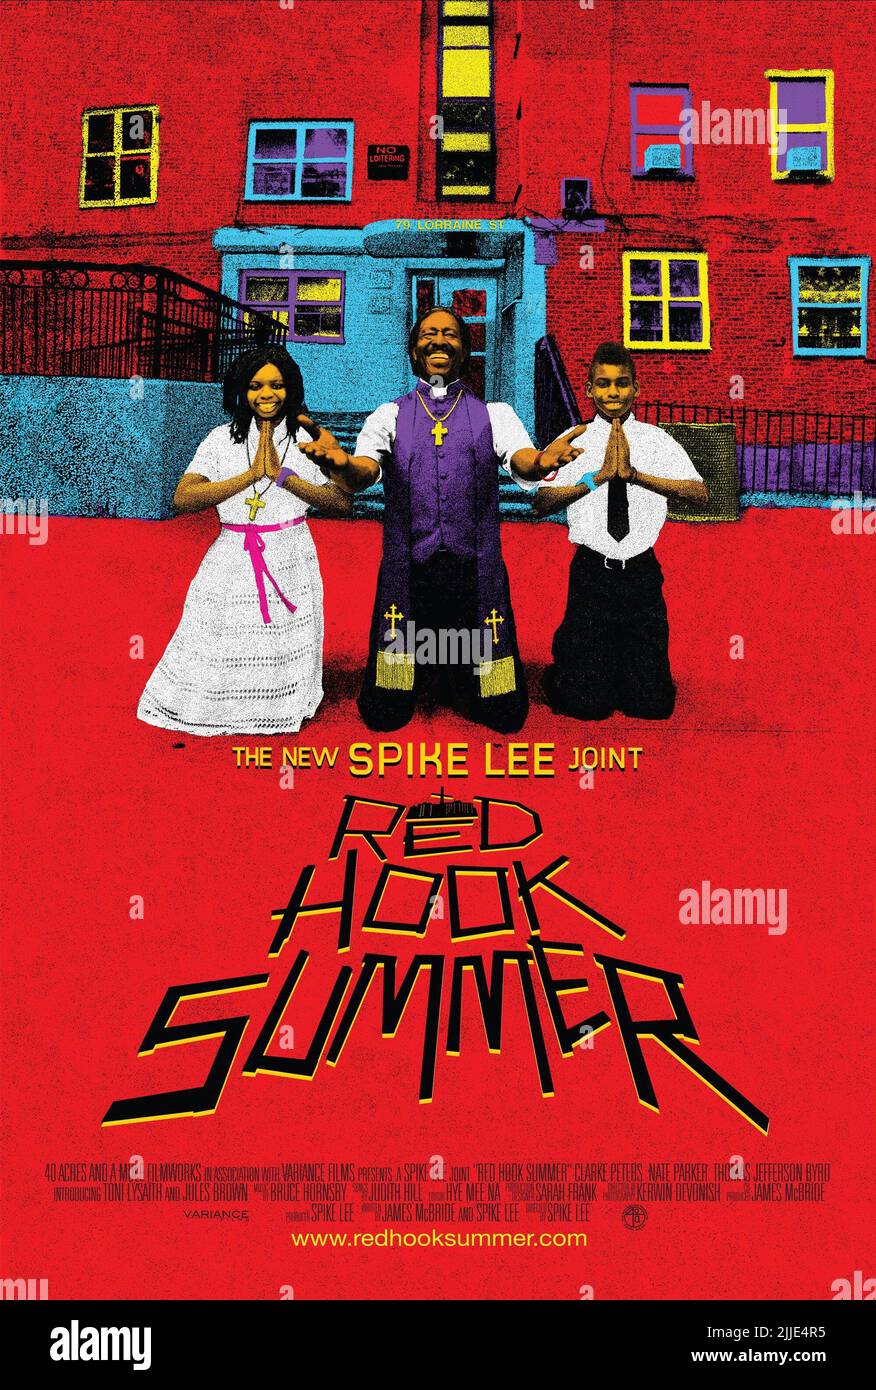 TONI LYSAITH, CLARKE PETERS, JULES BROWN POSTER, RED HOOK SOMMER, 2012 Stockfoto